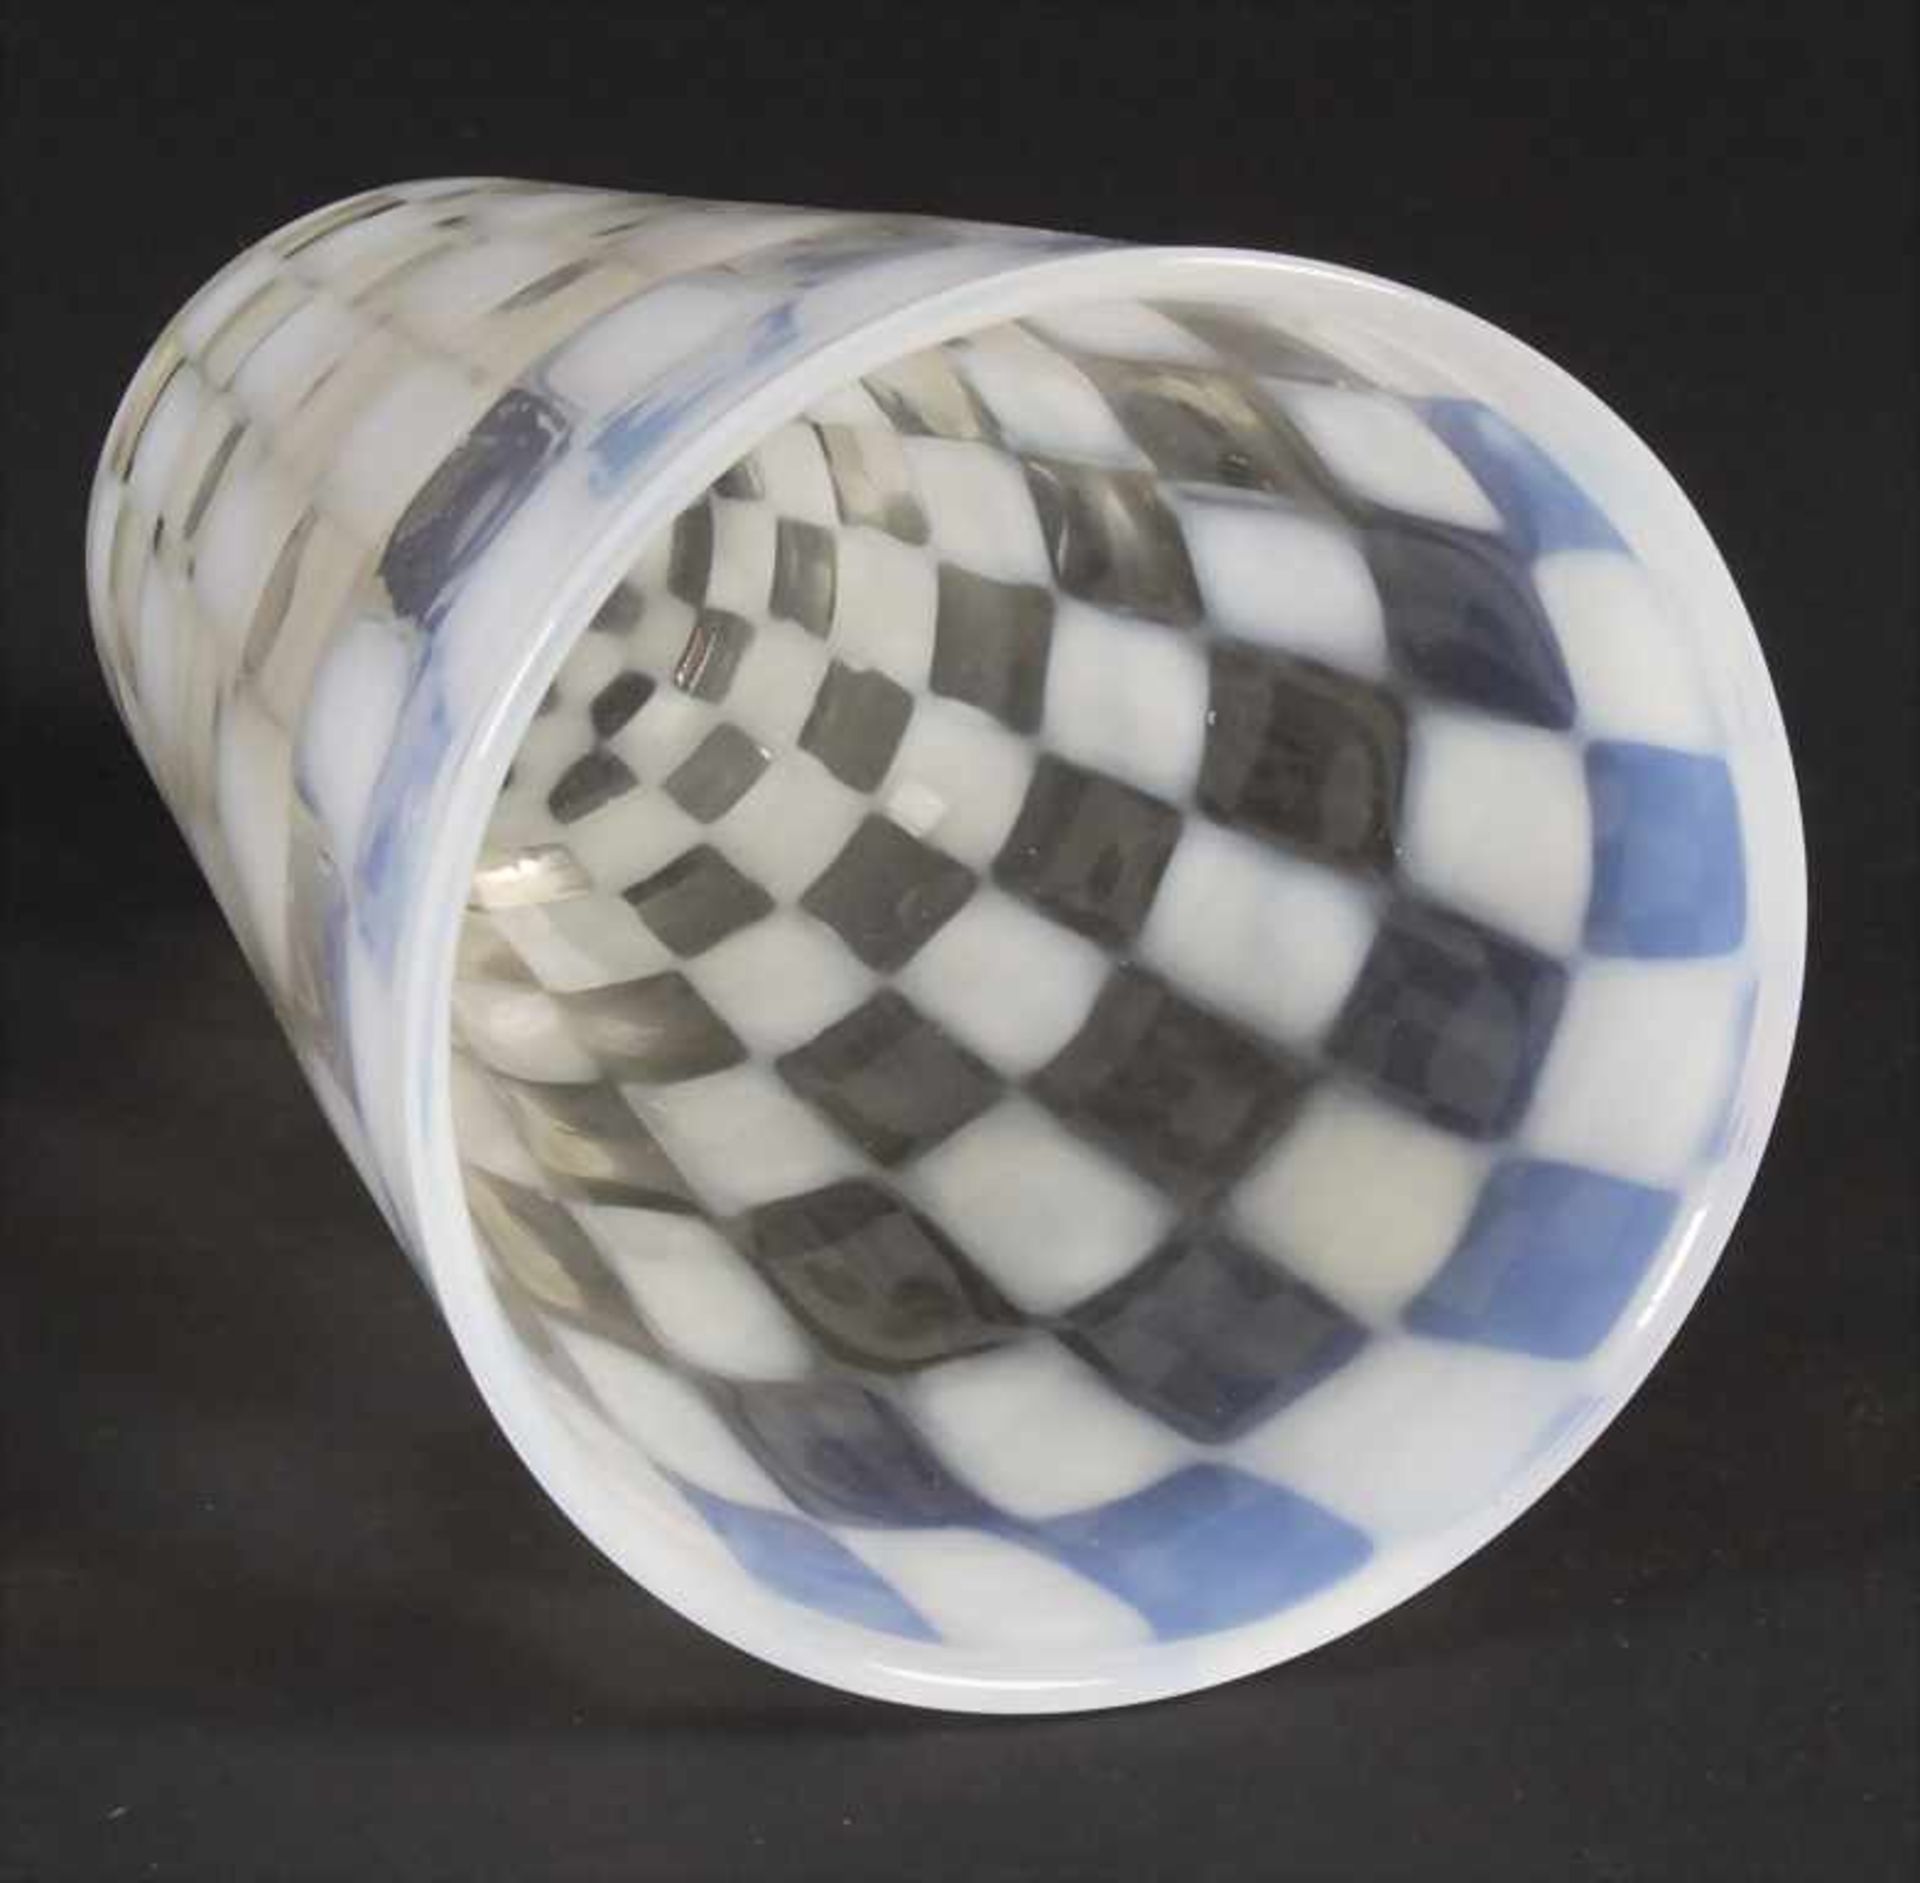 Glasziervase / A decorative glass vase, wohl Brovier & Toso, Murano - Image 3 of 4